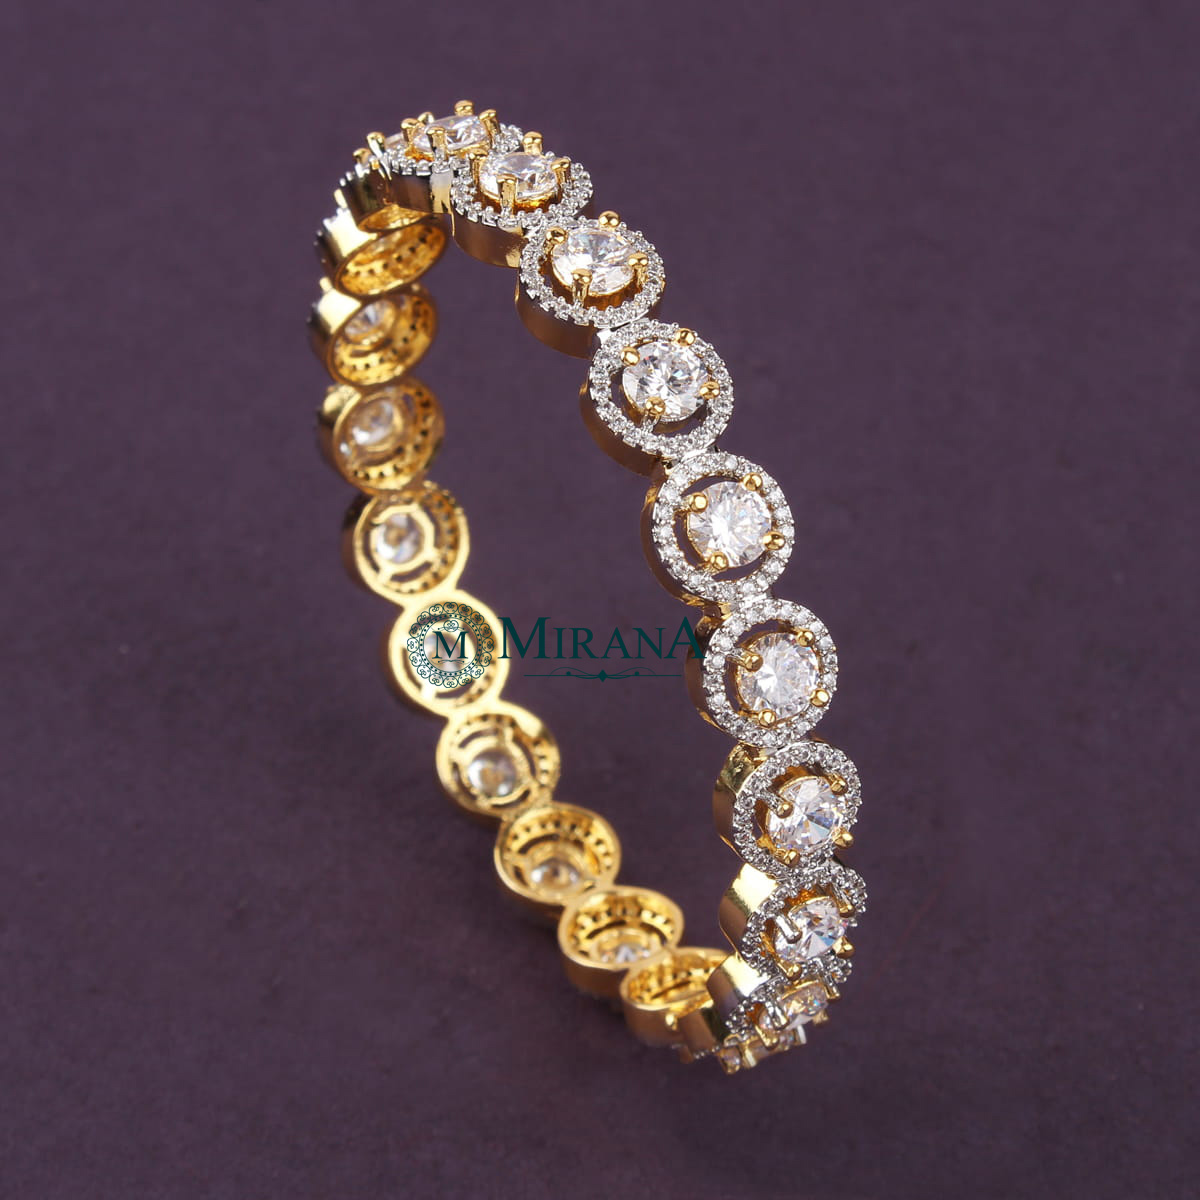 25ct Fancy Shape Moissanite Diamond Solitaire Bracelet With Sterling Silver  at Rs 59990 | Surat | ID: 2850868745430